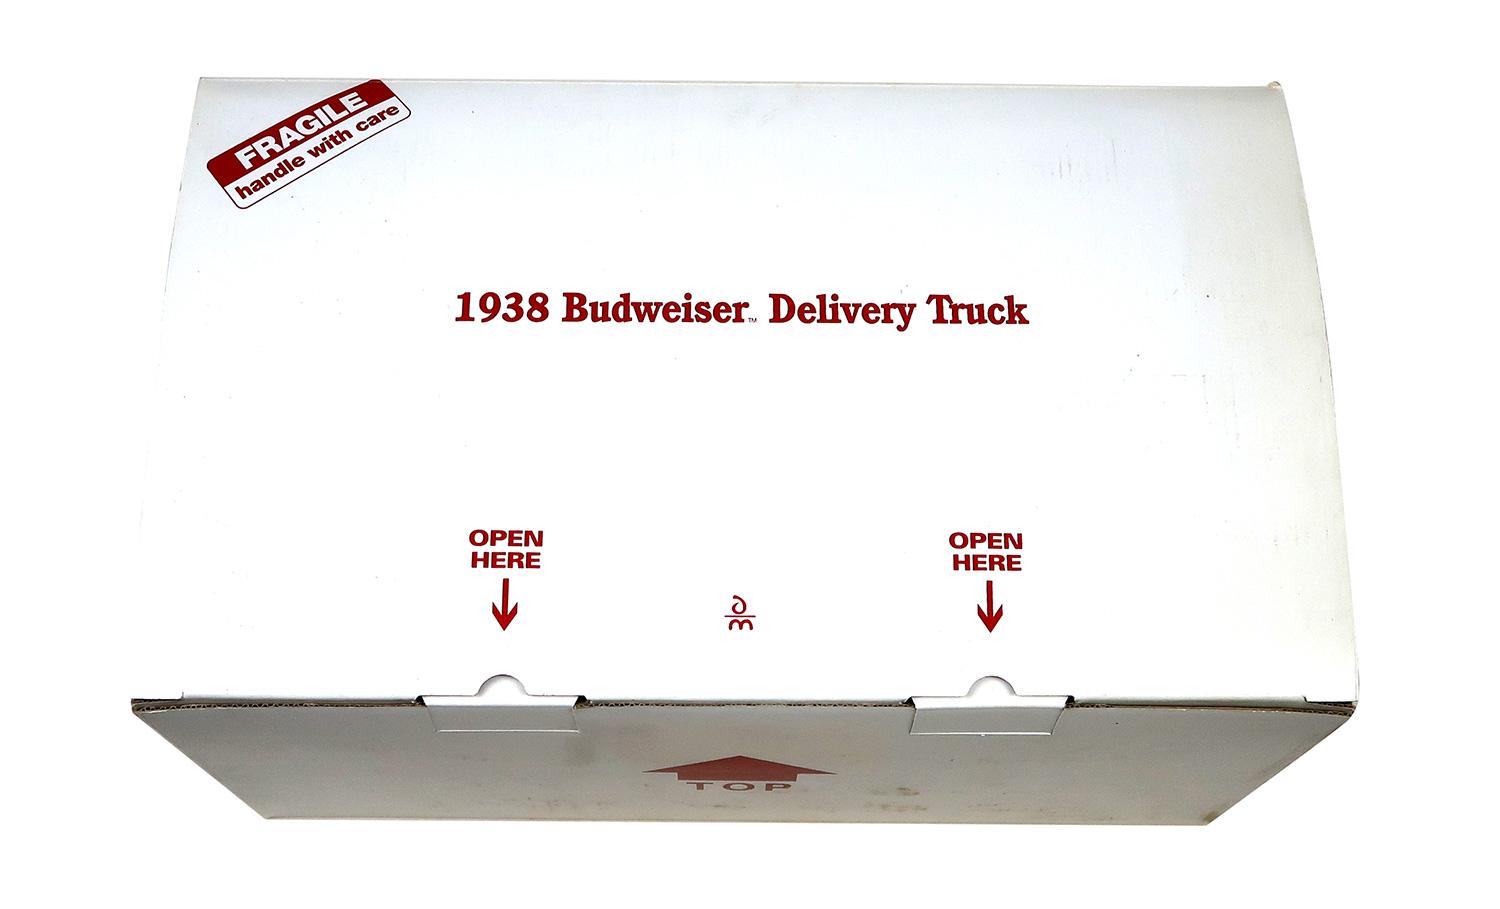 Toy Scale Model 1938 Budweiser Delivery Truck, New In Box, 16.5" L.